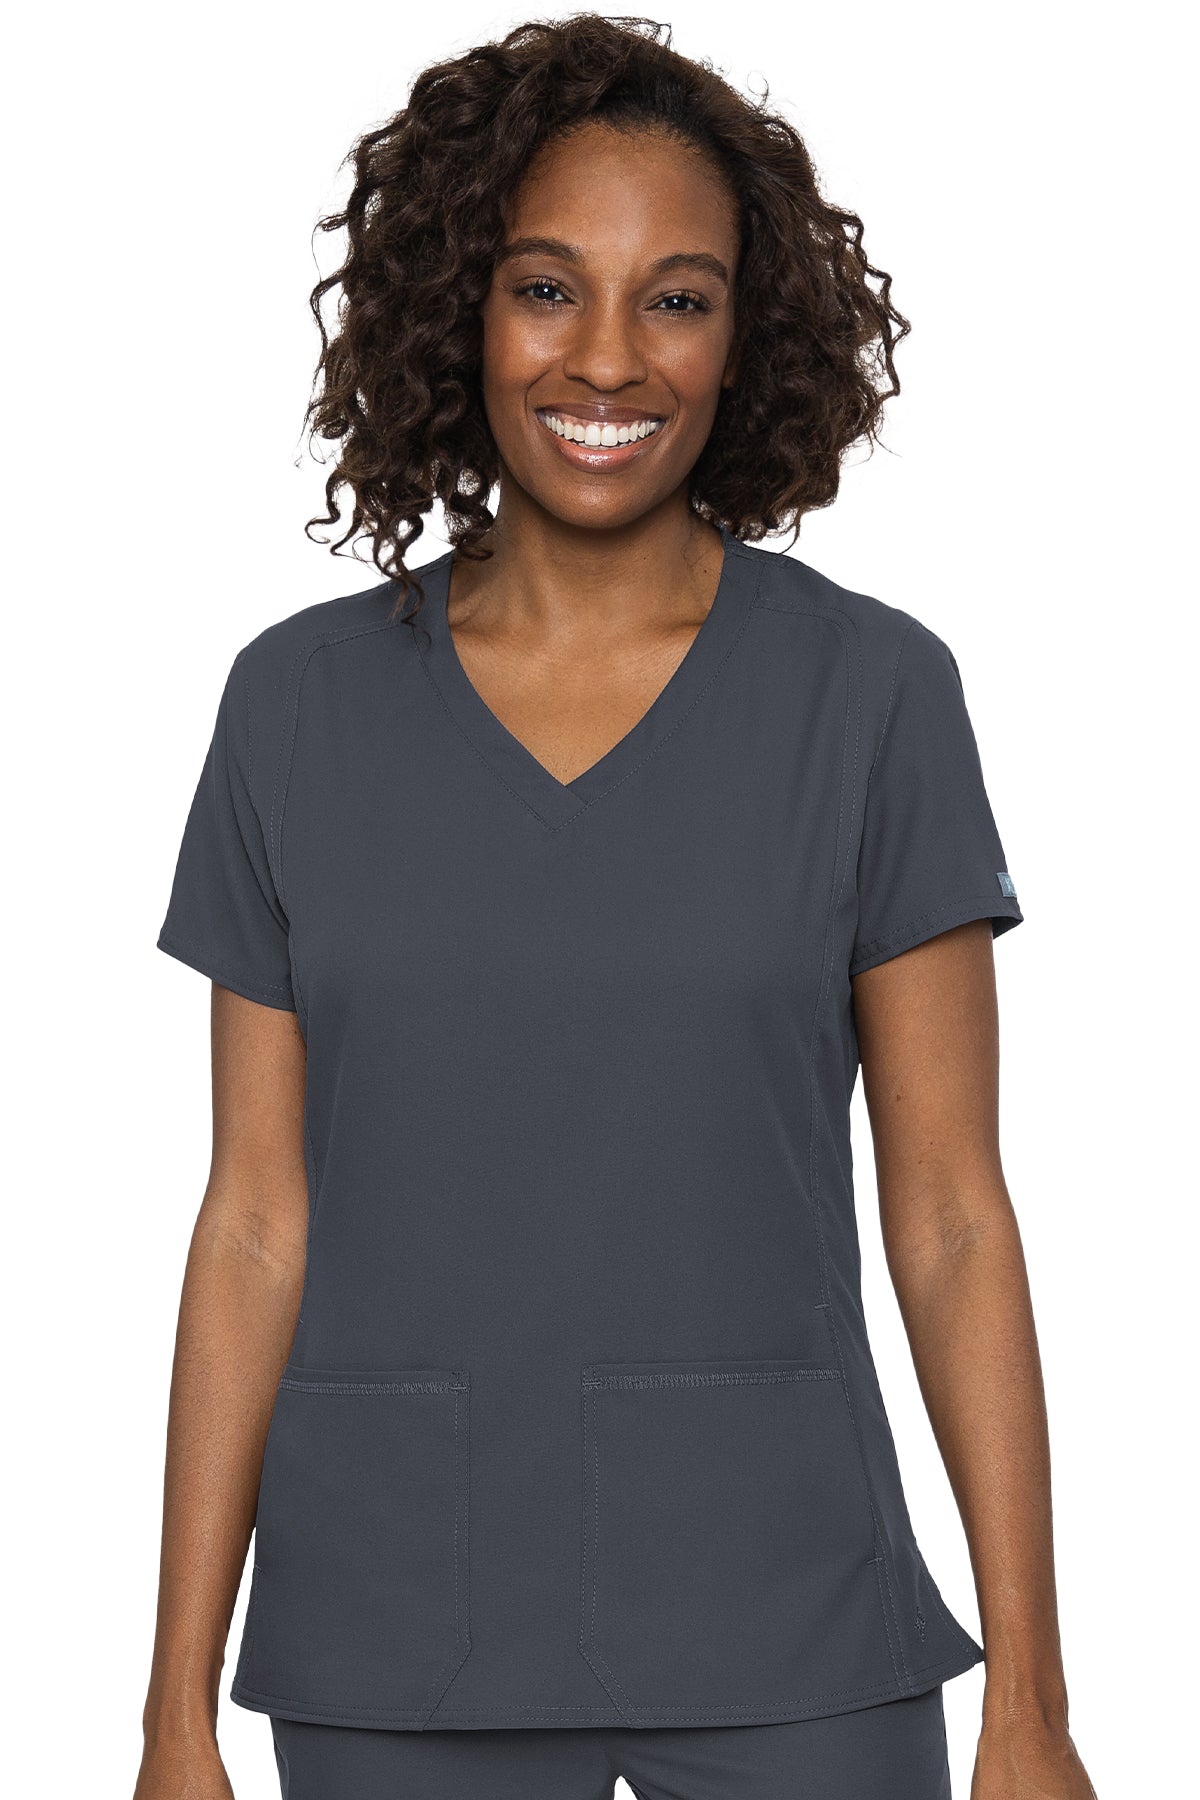 Med Couture Scrub Top Insight Classic V-Neck Side Pocket in Pewter at Parker's Clothing and Shoes.